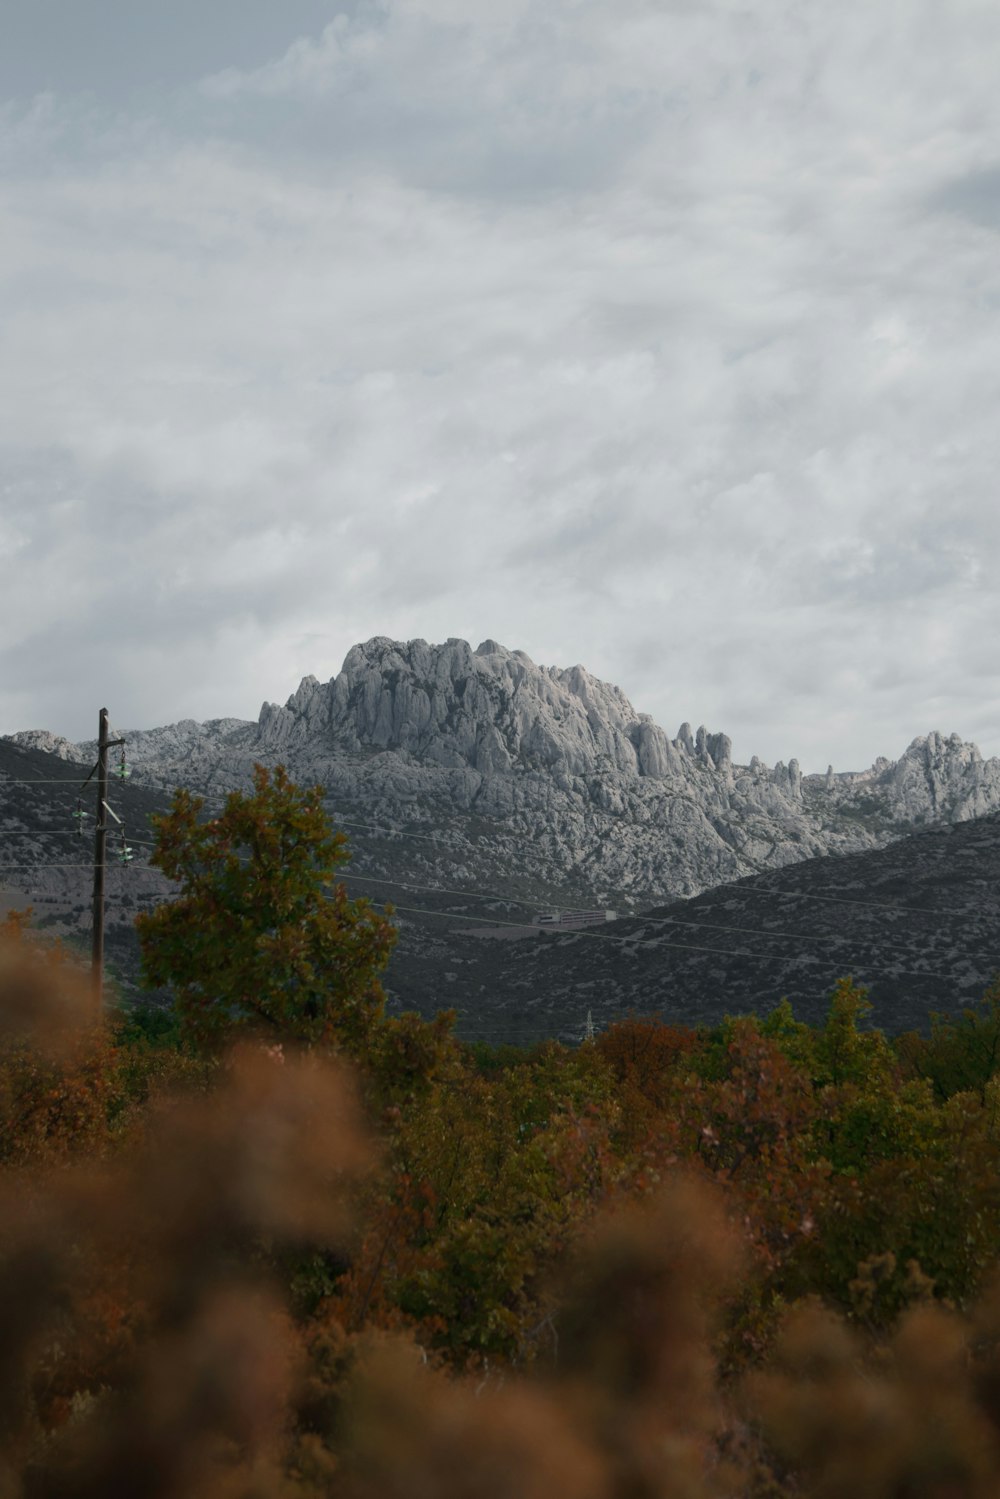 gray rocky mountain under white cloudy sky during daytime